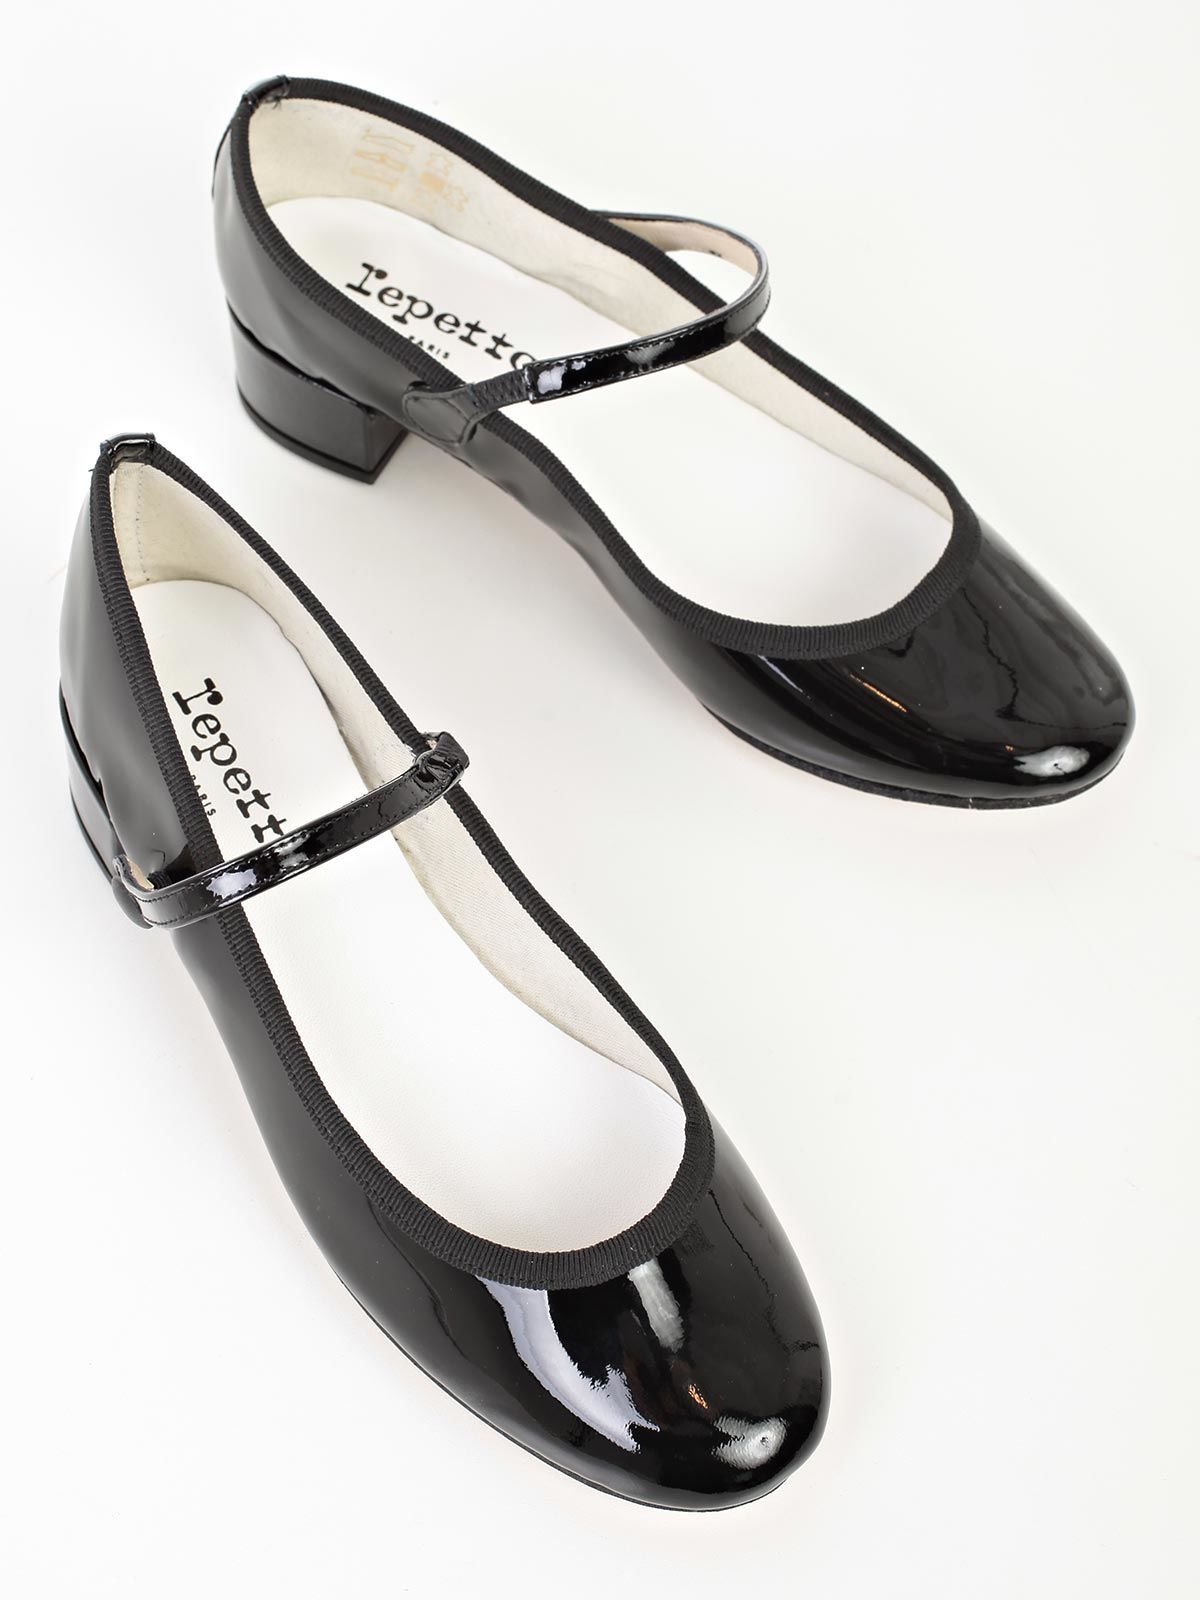 Repetto - Repetto High-heeled shoe - Black, Women's High-heeled shoes ...